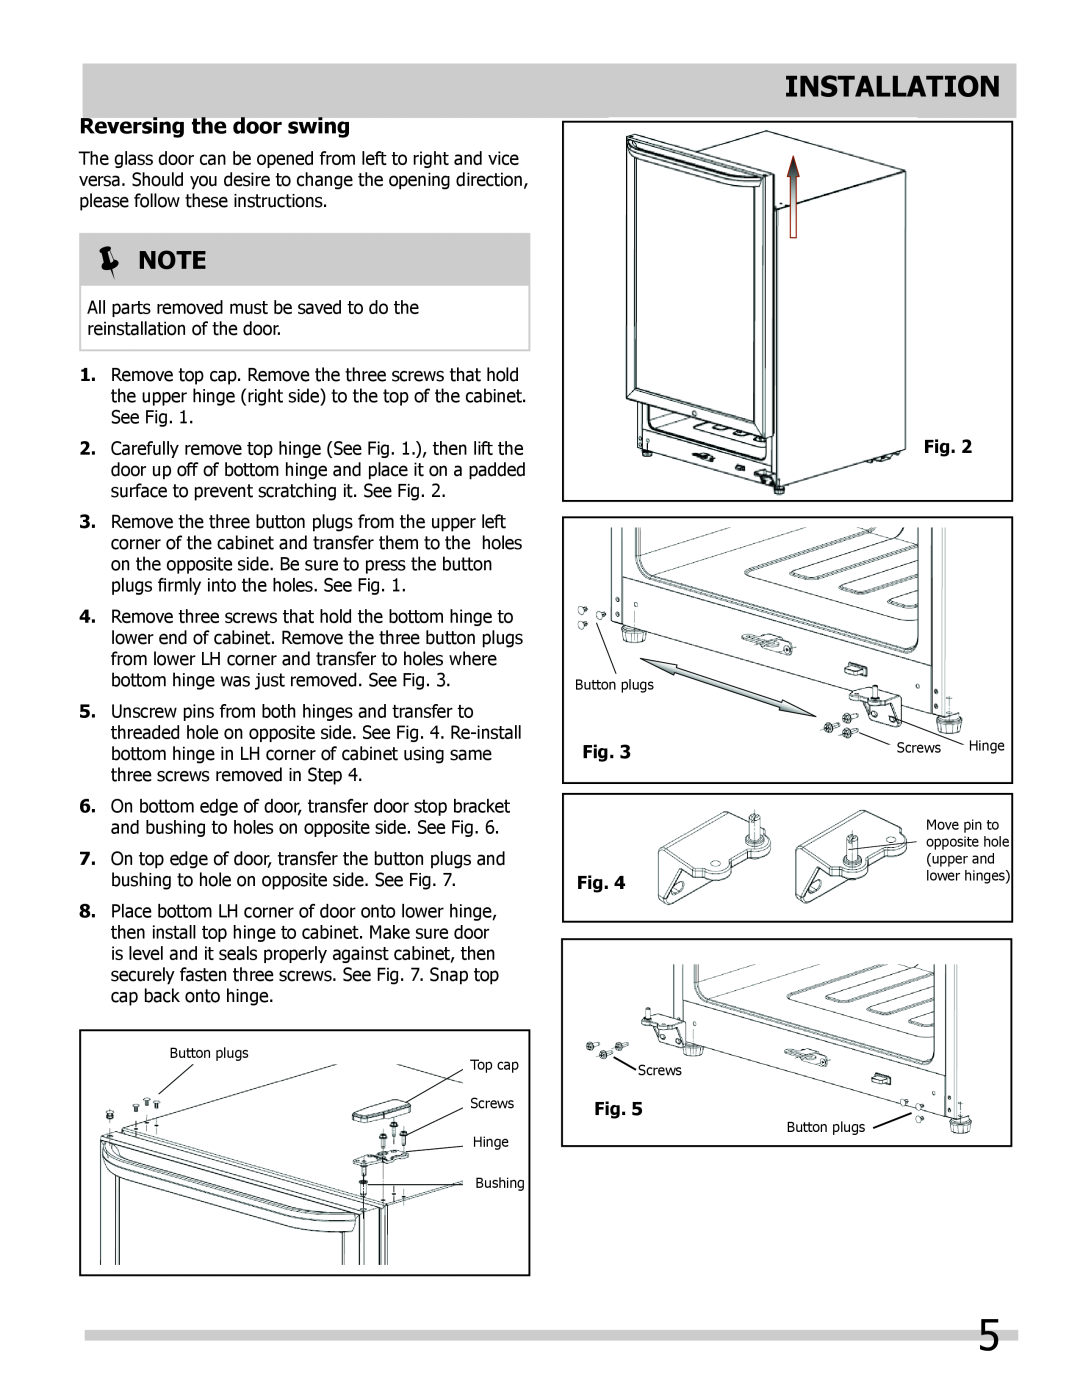 Frigidaire 242101800 important safety instructions Installation, Reversing the door swing, Note, Fig 